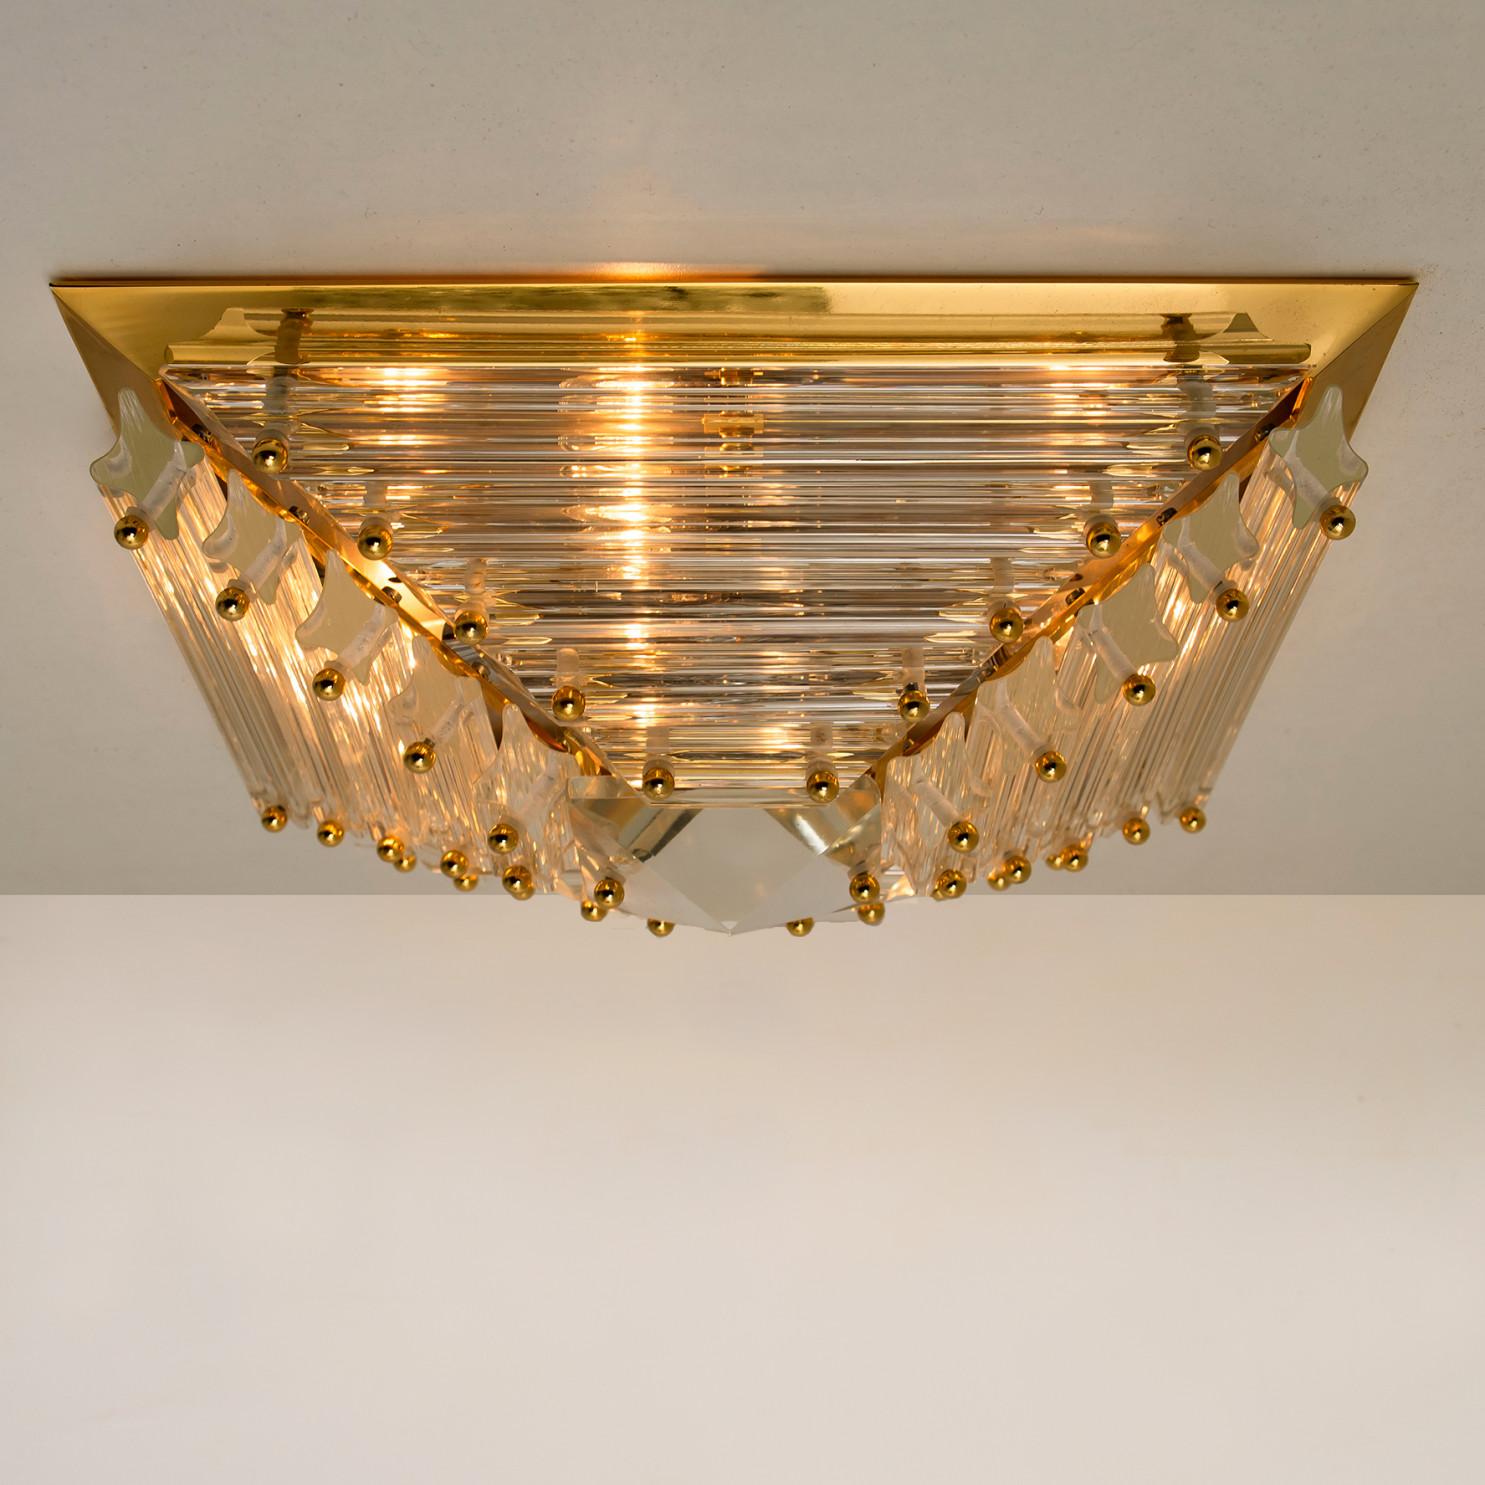 Other 1 of the 2 Large Gold-Plated Piramide Venini Flush Mounts, 1970s, Italy For Sale